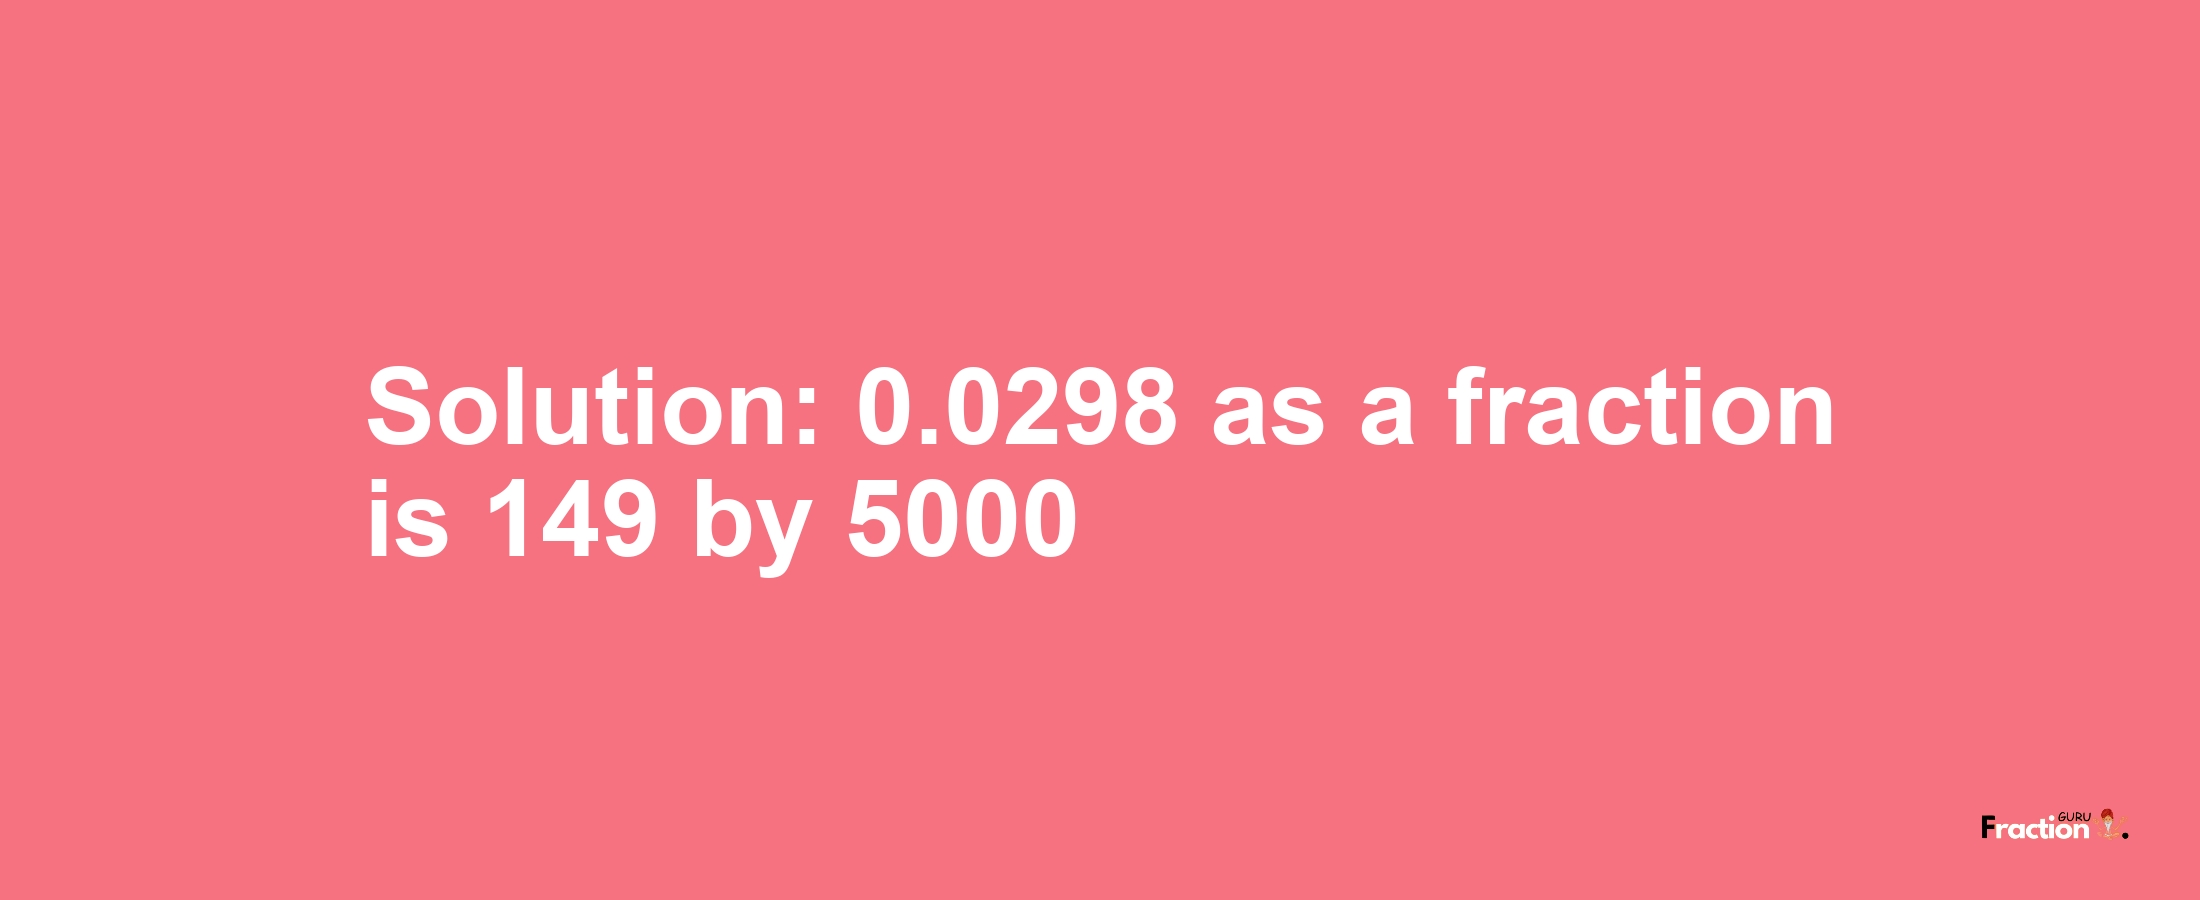 Solution:0.0298 as a fraction is 149/5000